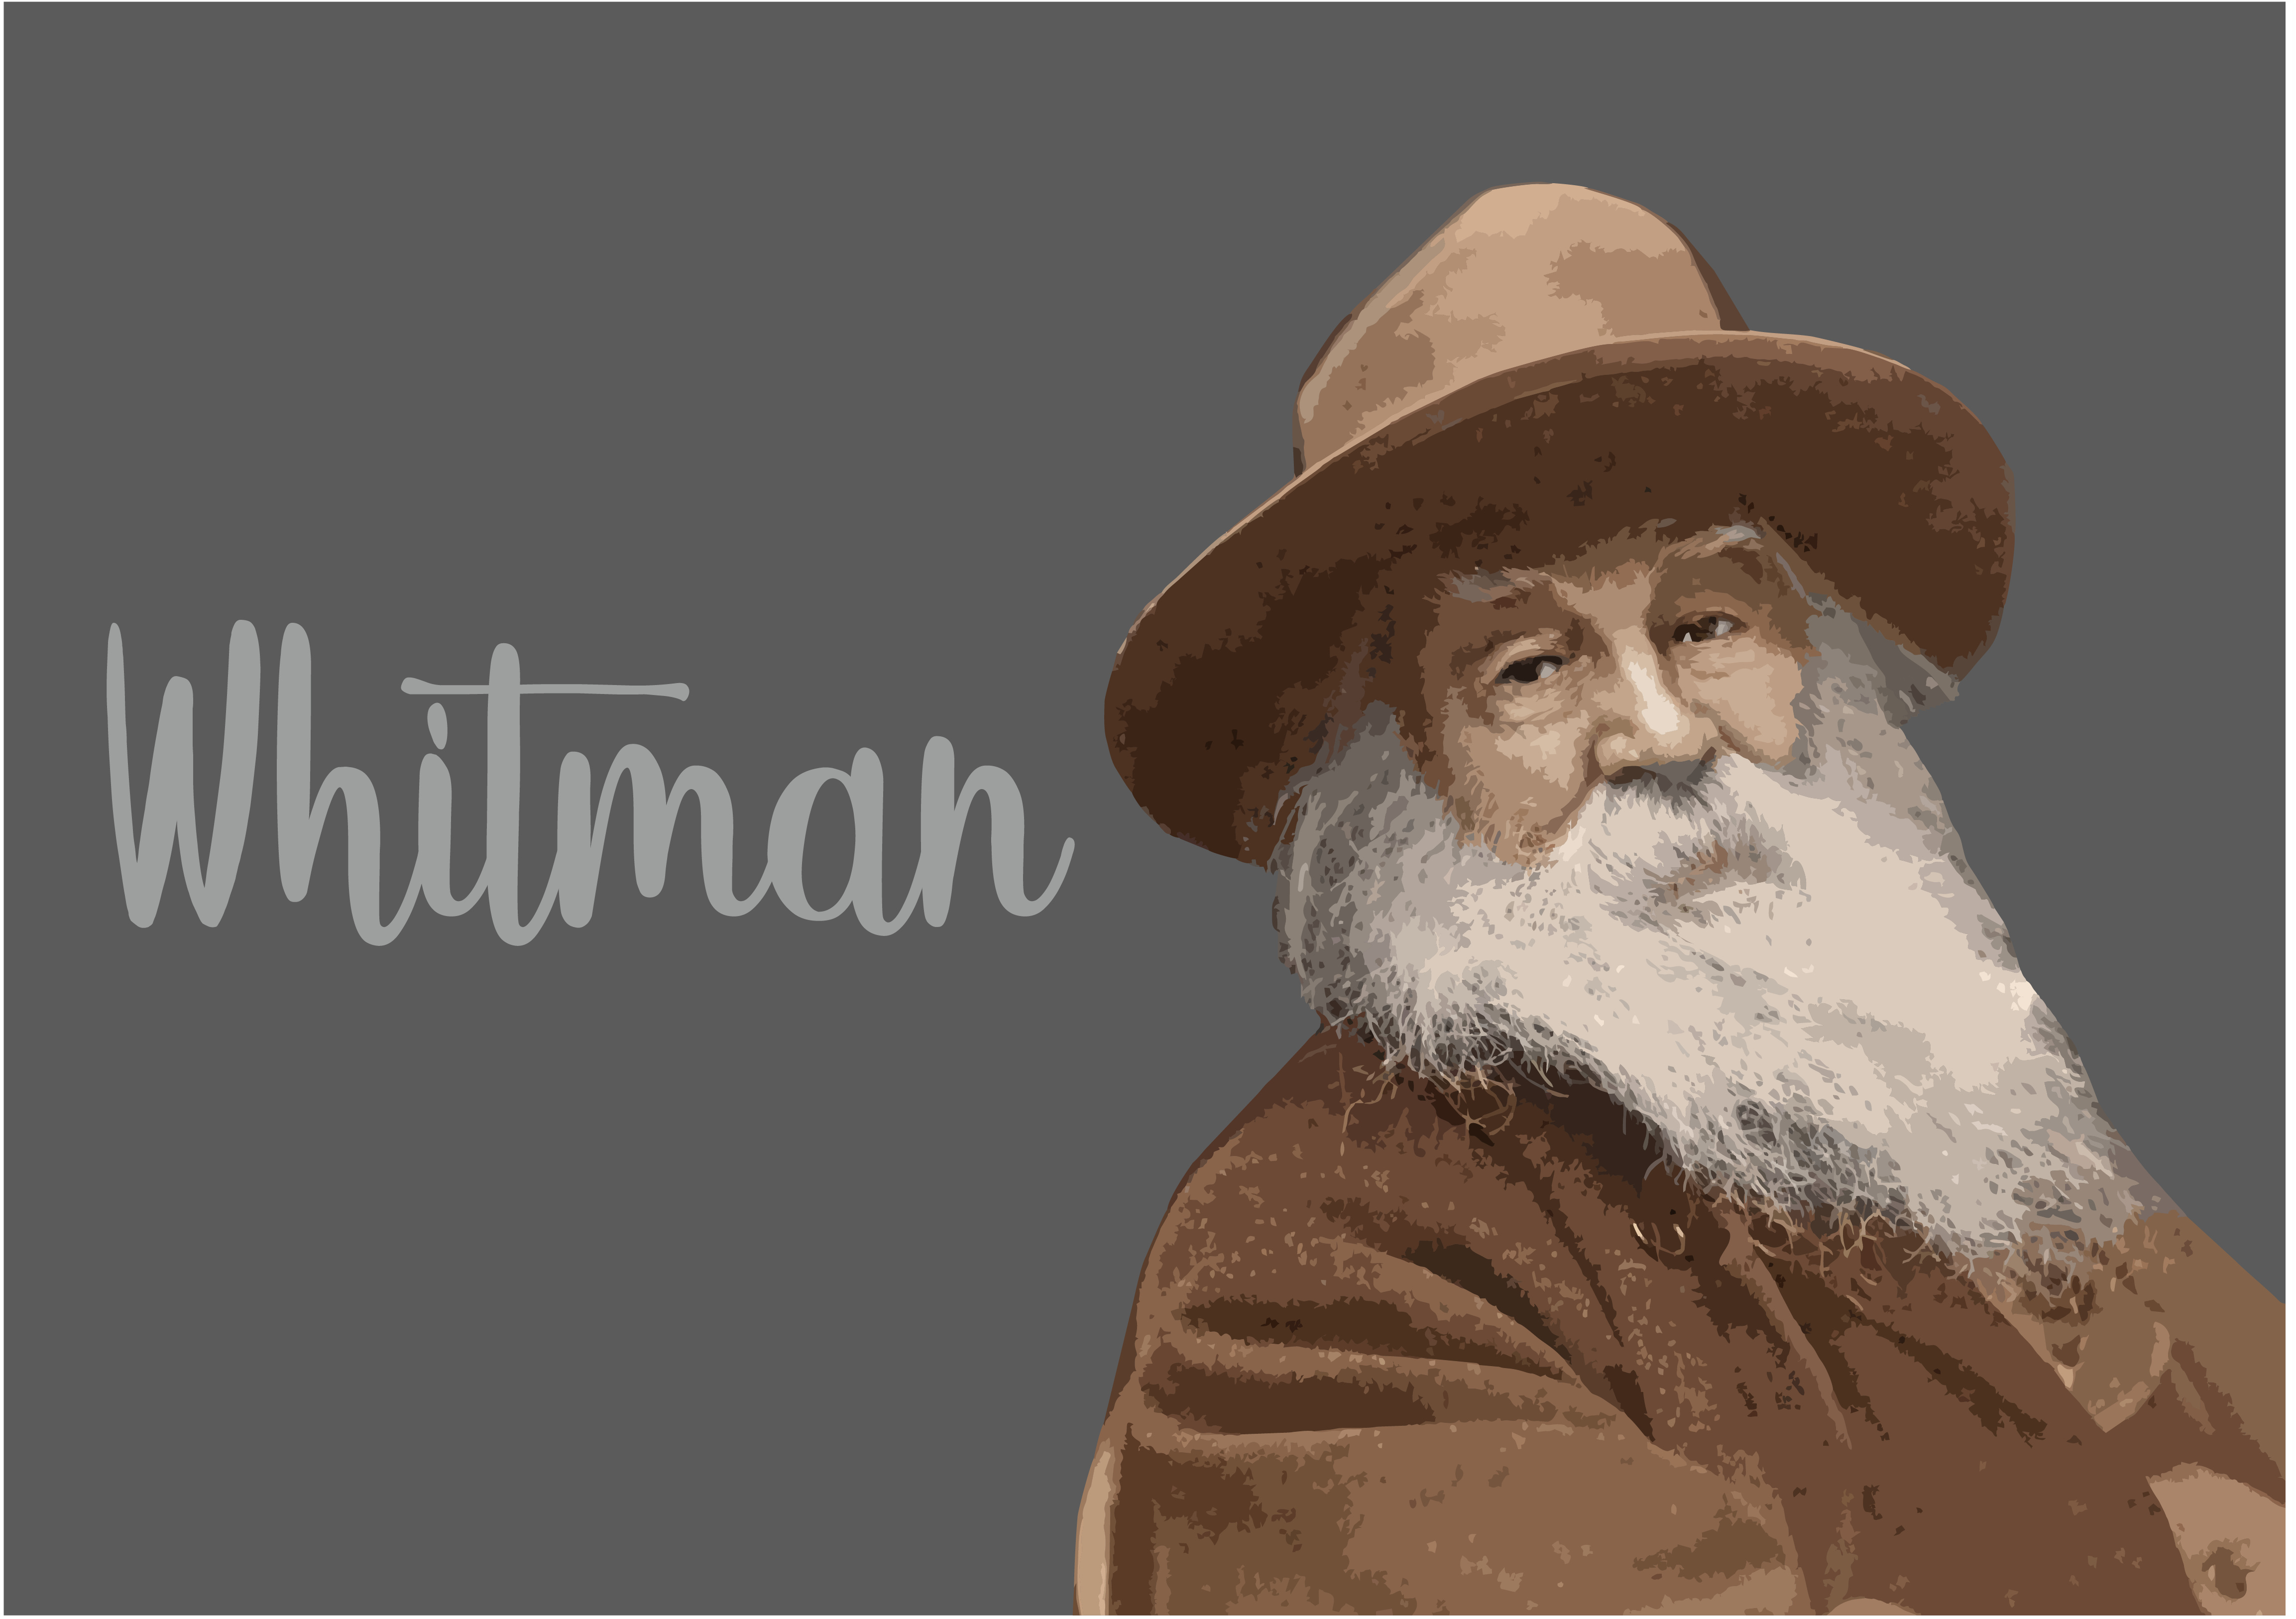 20 Walt Whitman Facts About the Celebrated American Poet - Facts.net